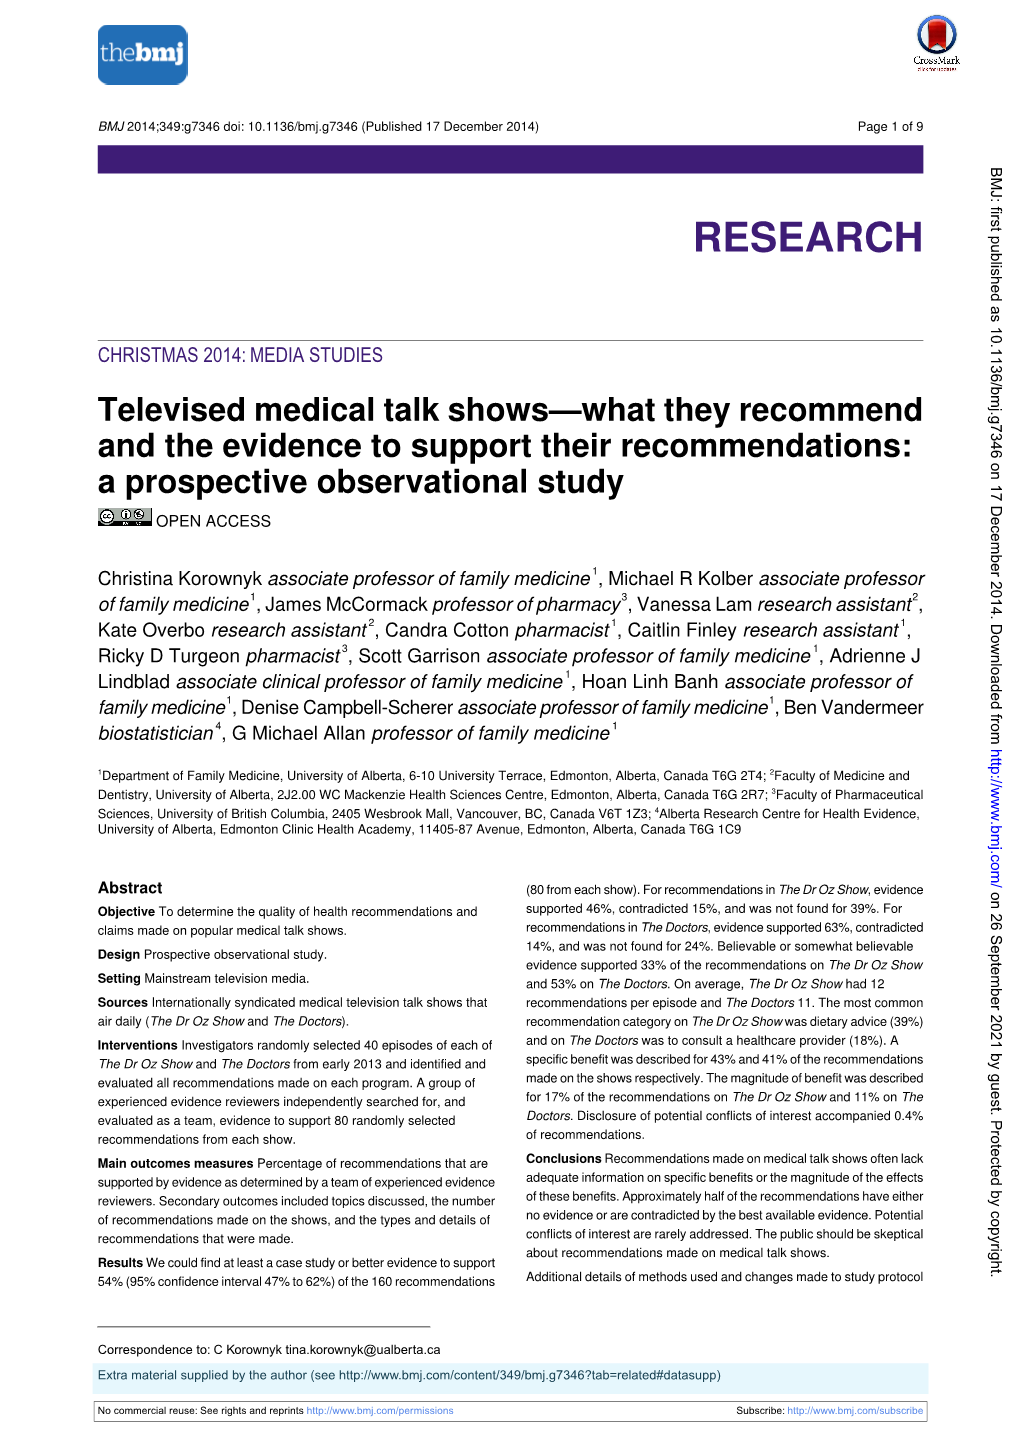 Televised Medical Talk Shows—What They Recommend and the Evidence to Support Their Recommendations: a Prospective Observational Study OPEN ACCESS